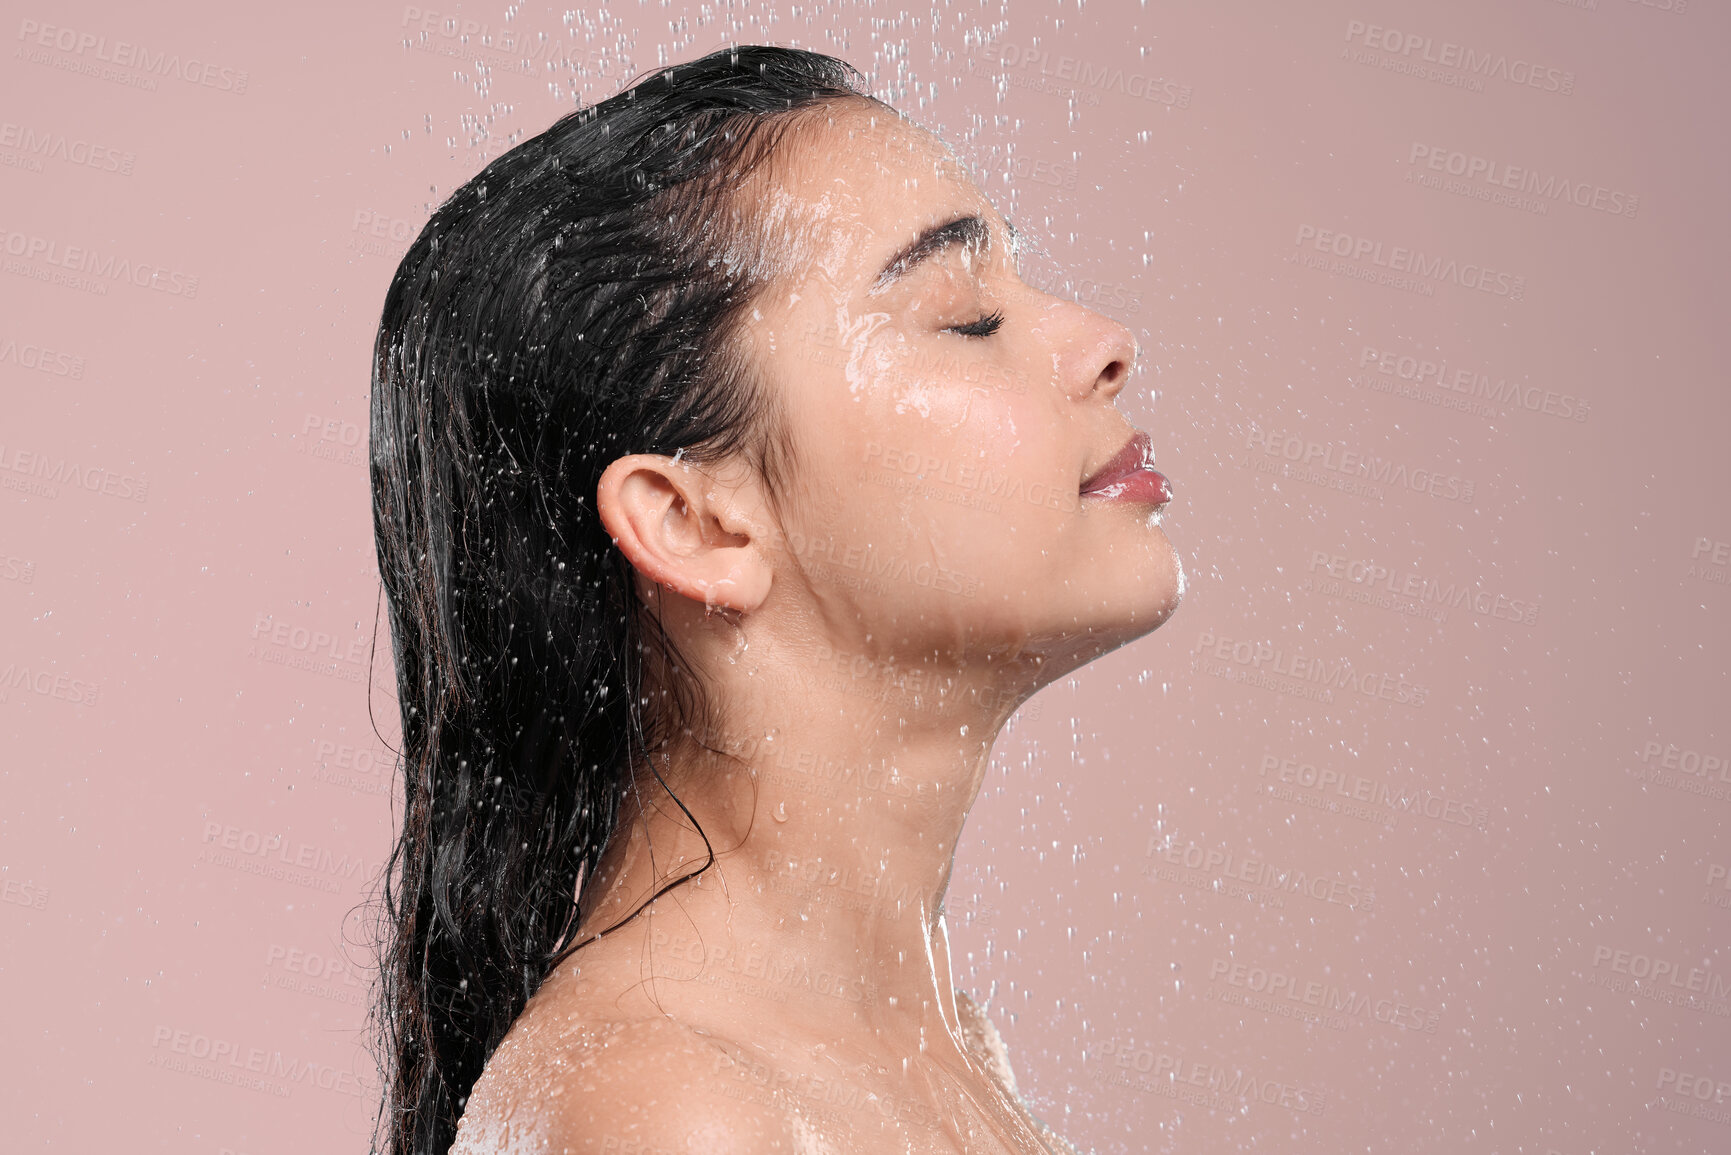 Buy stock photo Shot of a young woman washing her hair in a shower against a studio background